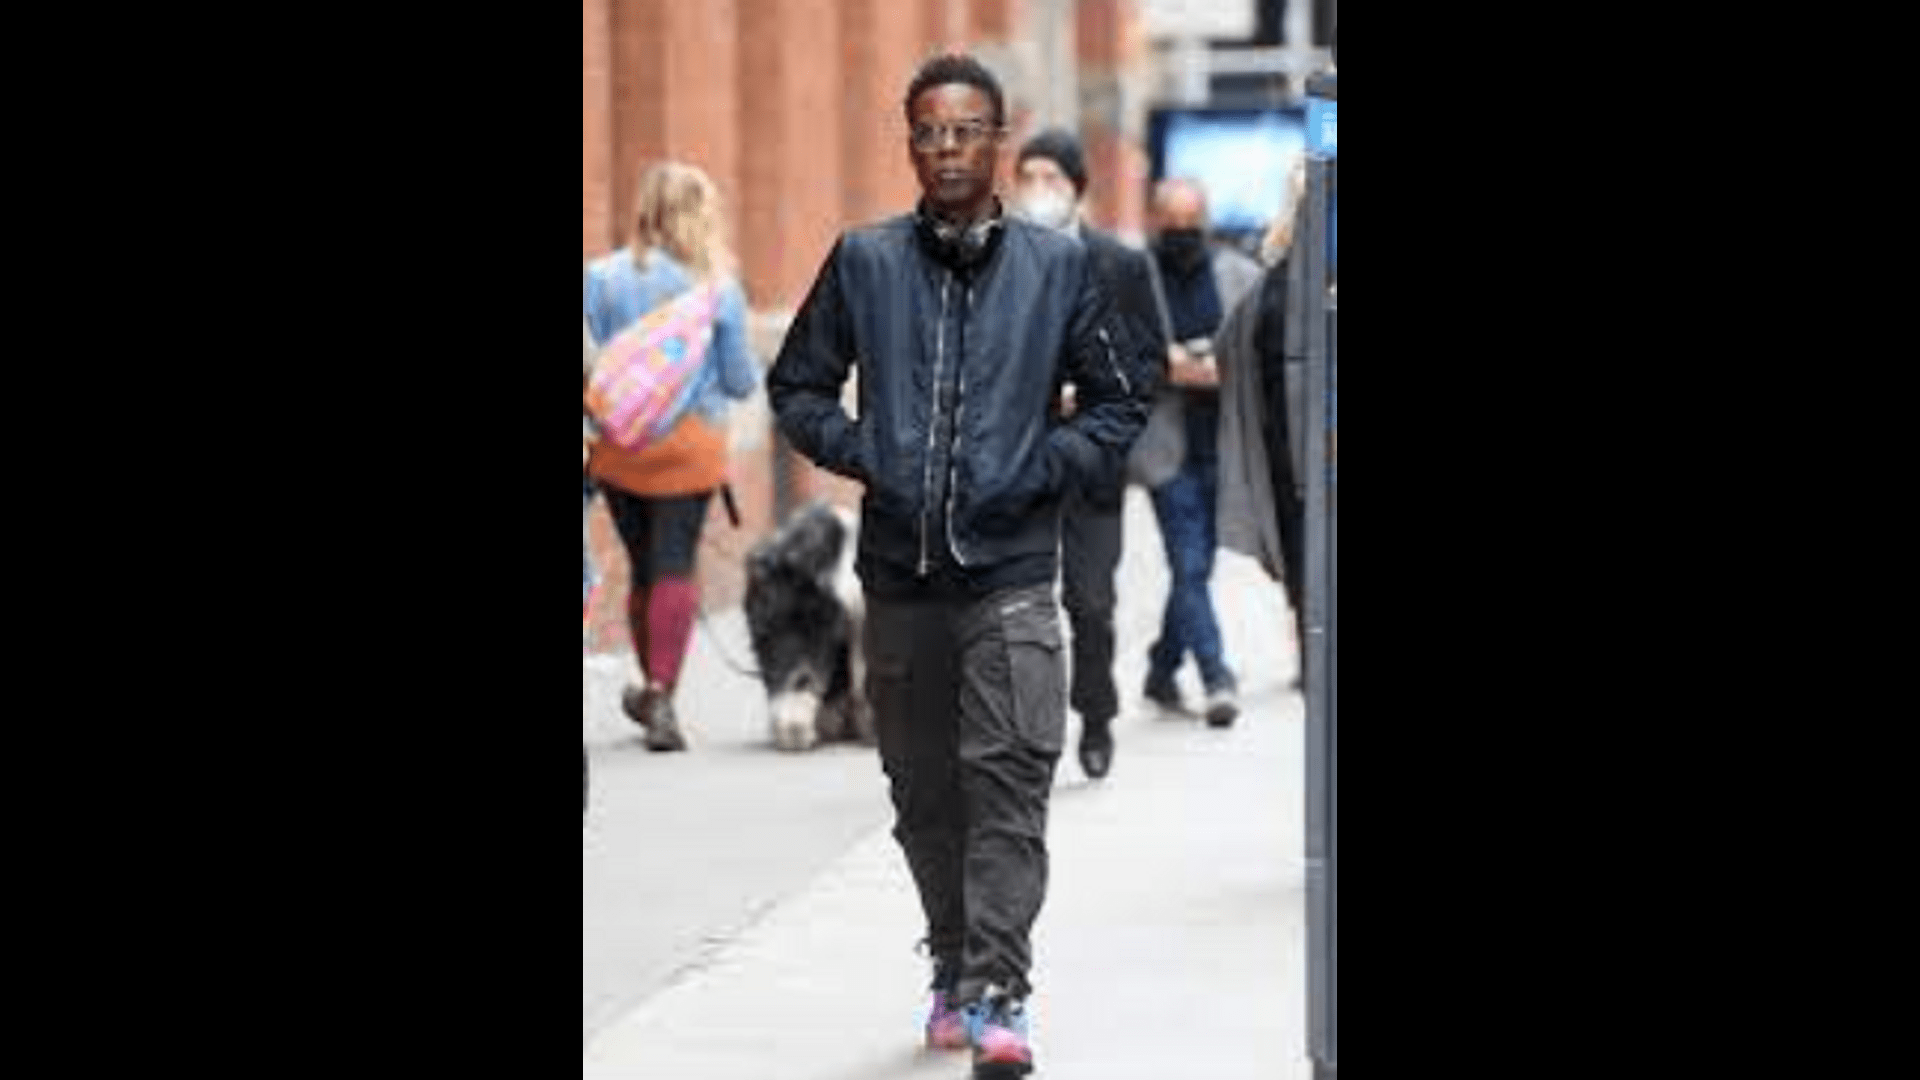 ”chris-rock-looks-serious-in-new-york-in-a-rare-photo-after-the-oscar-slap”